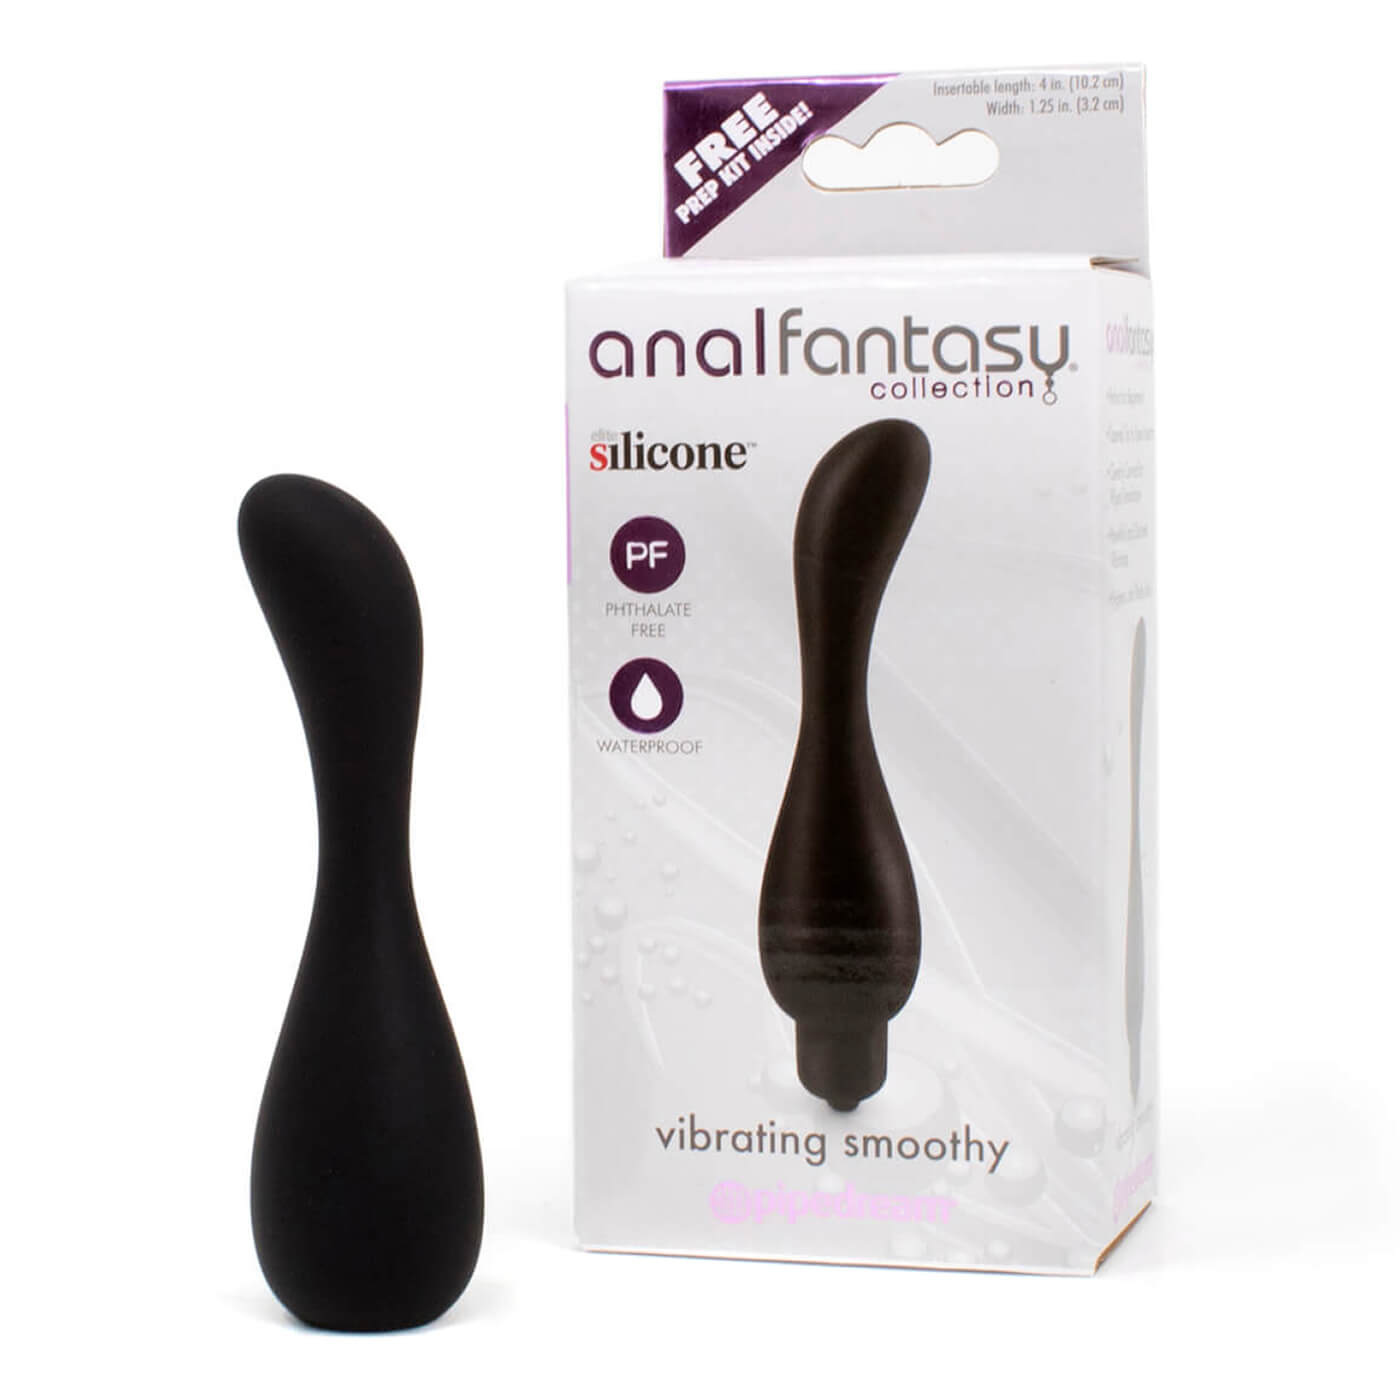 Anal Fantasy Vibrating Smoothy Beginners P-Spot Massager